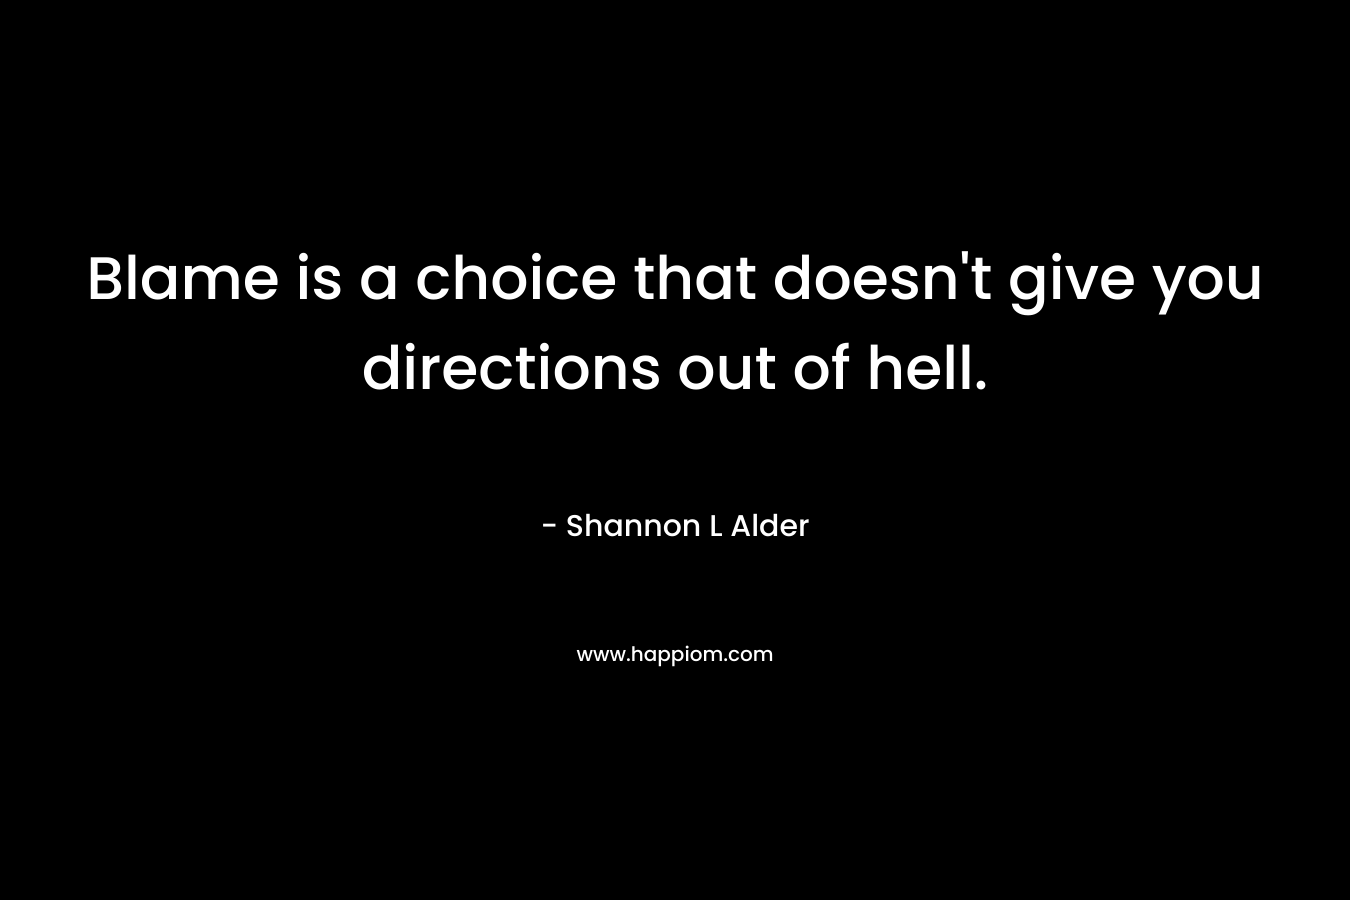 Blame is a choice that doesn't give you directions out of hell.